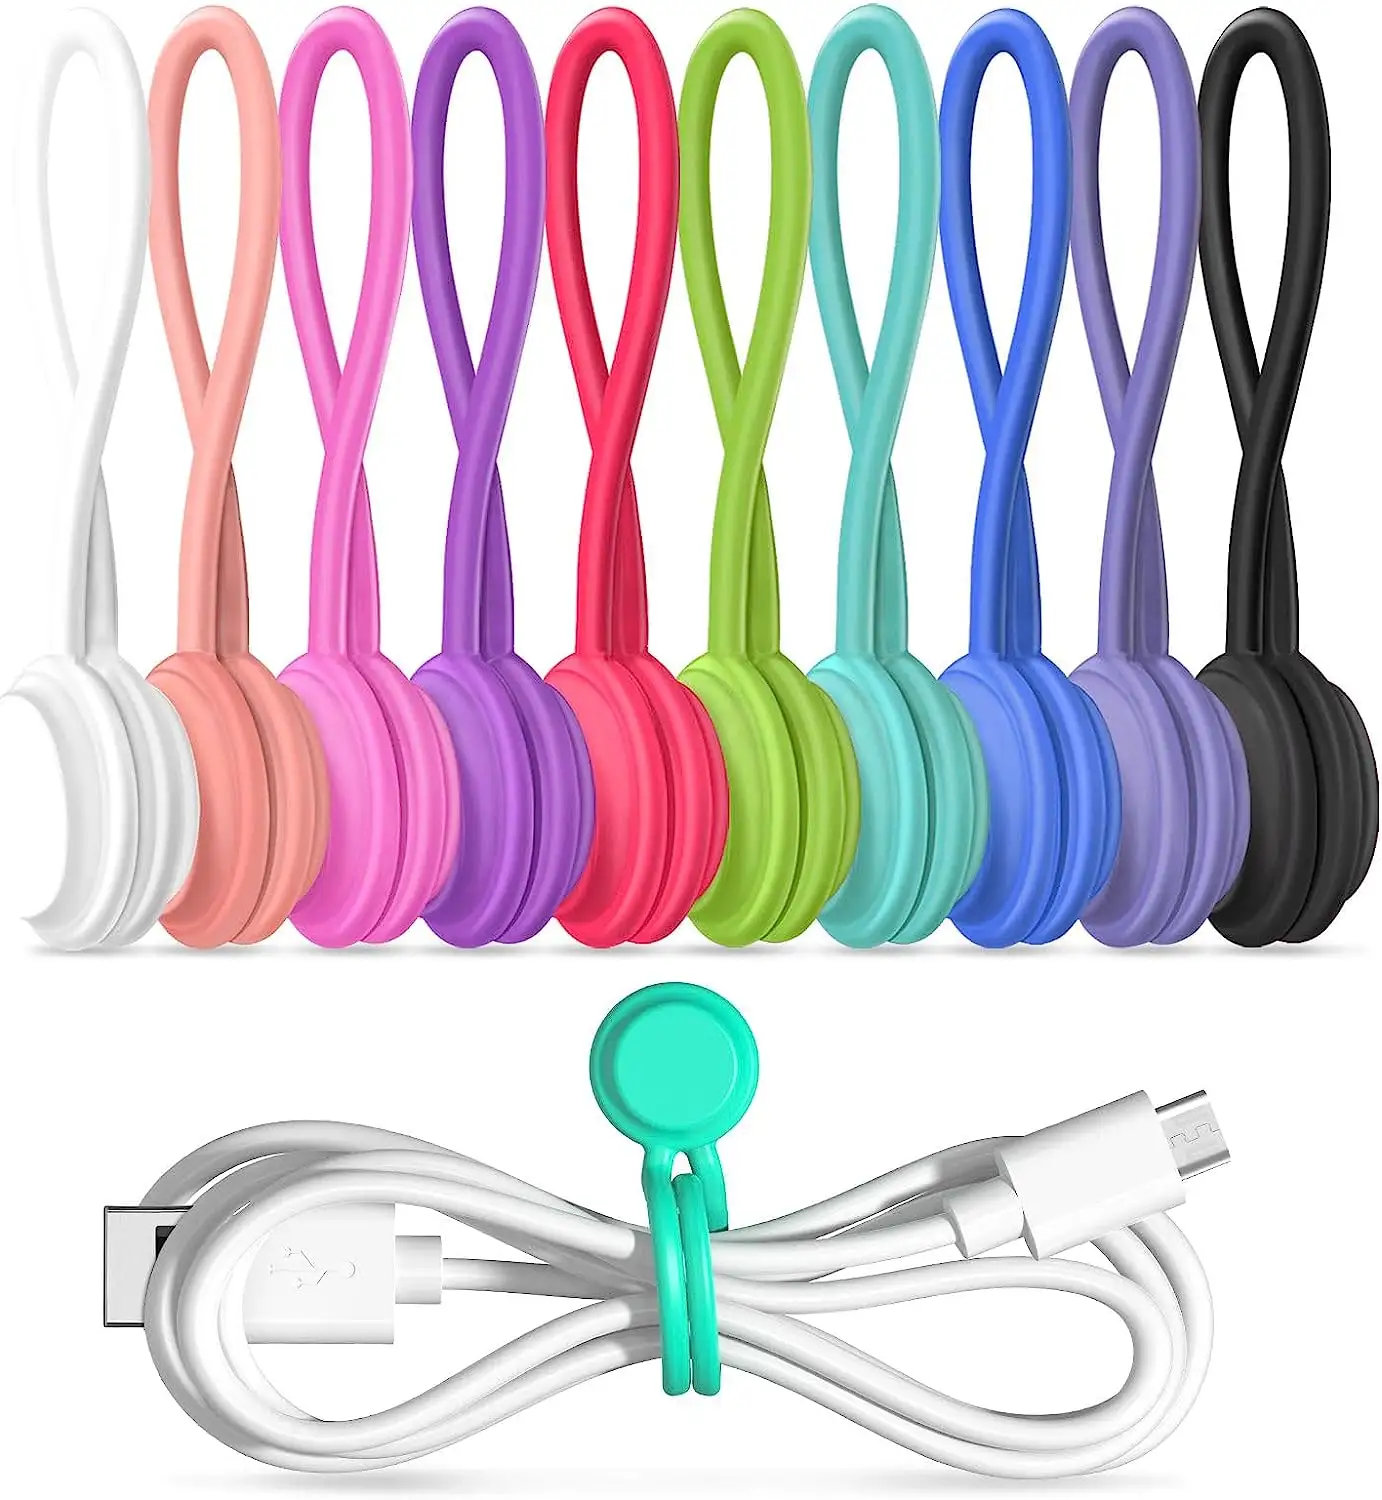 Super Strong Magnetic Silicone Cable Ties Reusable Zip Ties For Bundling and Organizing Reusable Silicone Magnetic Cable Ties